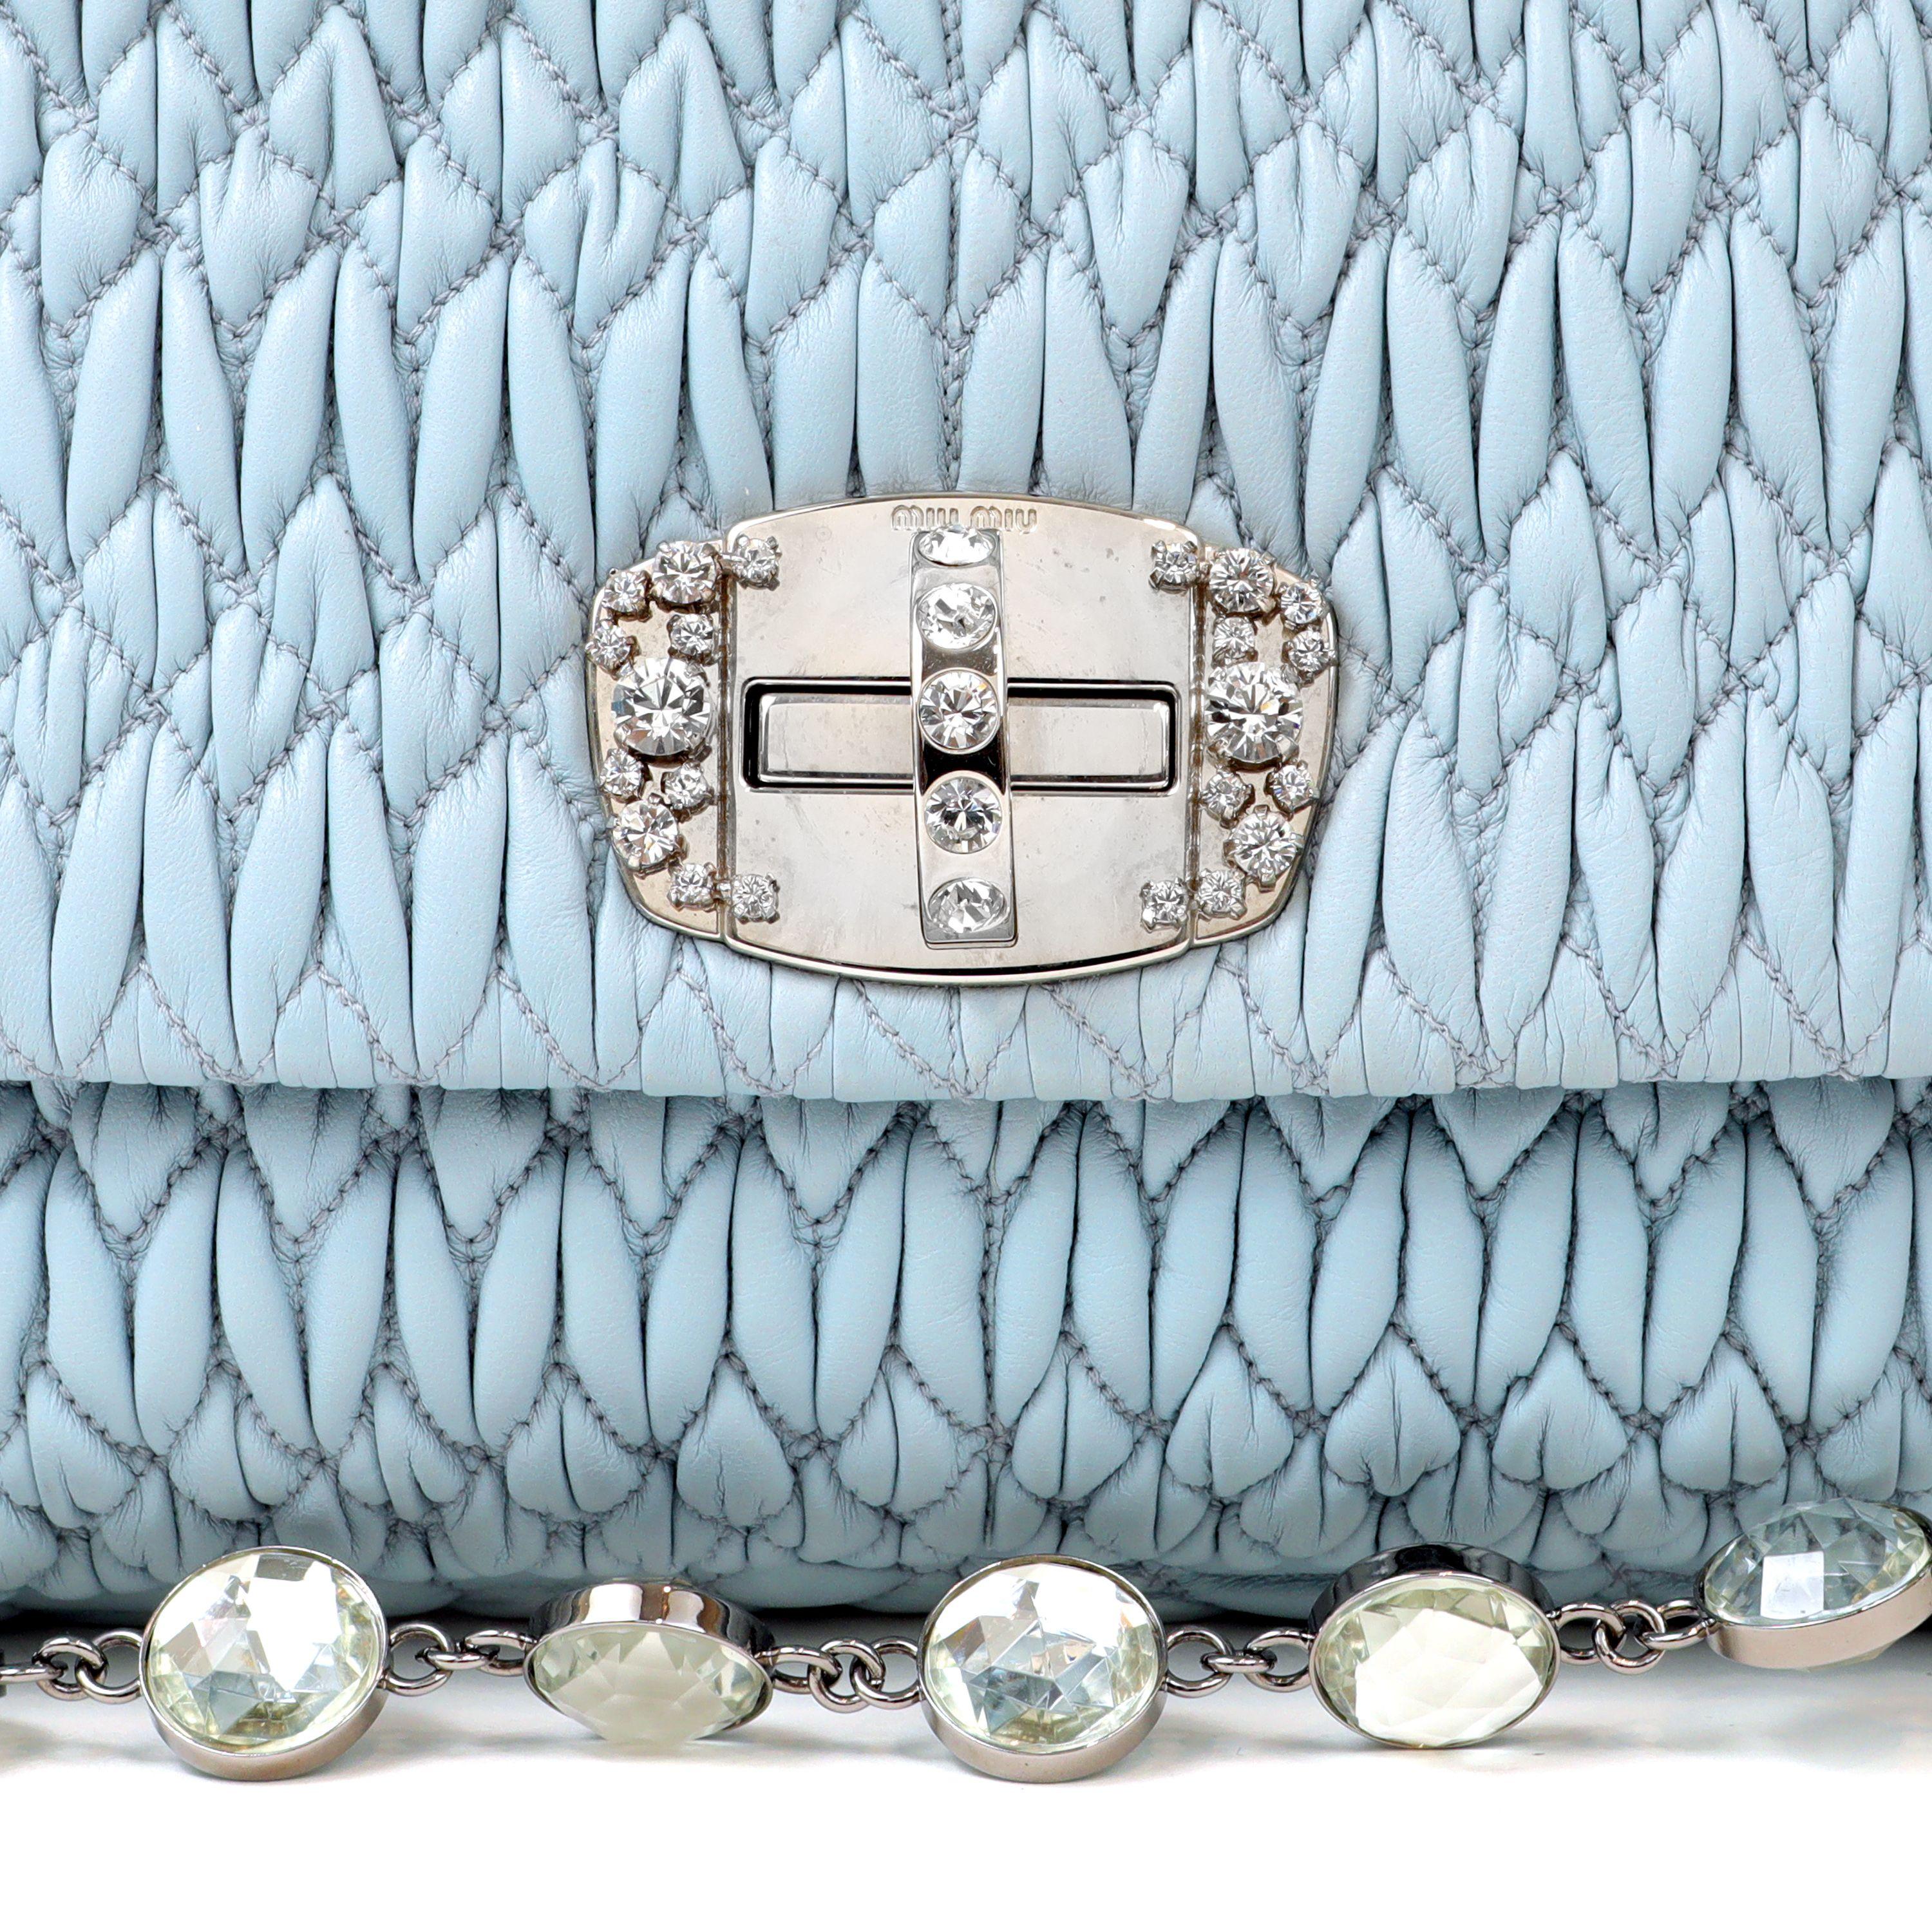 This authentic Miu Miu Powder Blue Crystal Cloquè Large Bag is in pristine condition.  The iconic design features light blue raised quilted Nappa leather with silver and crystal turn lock closure.  May be carried by the detachable leather strap or